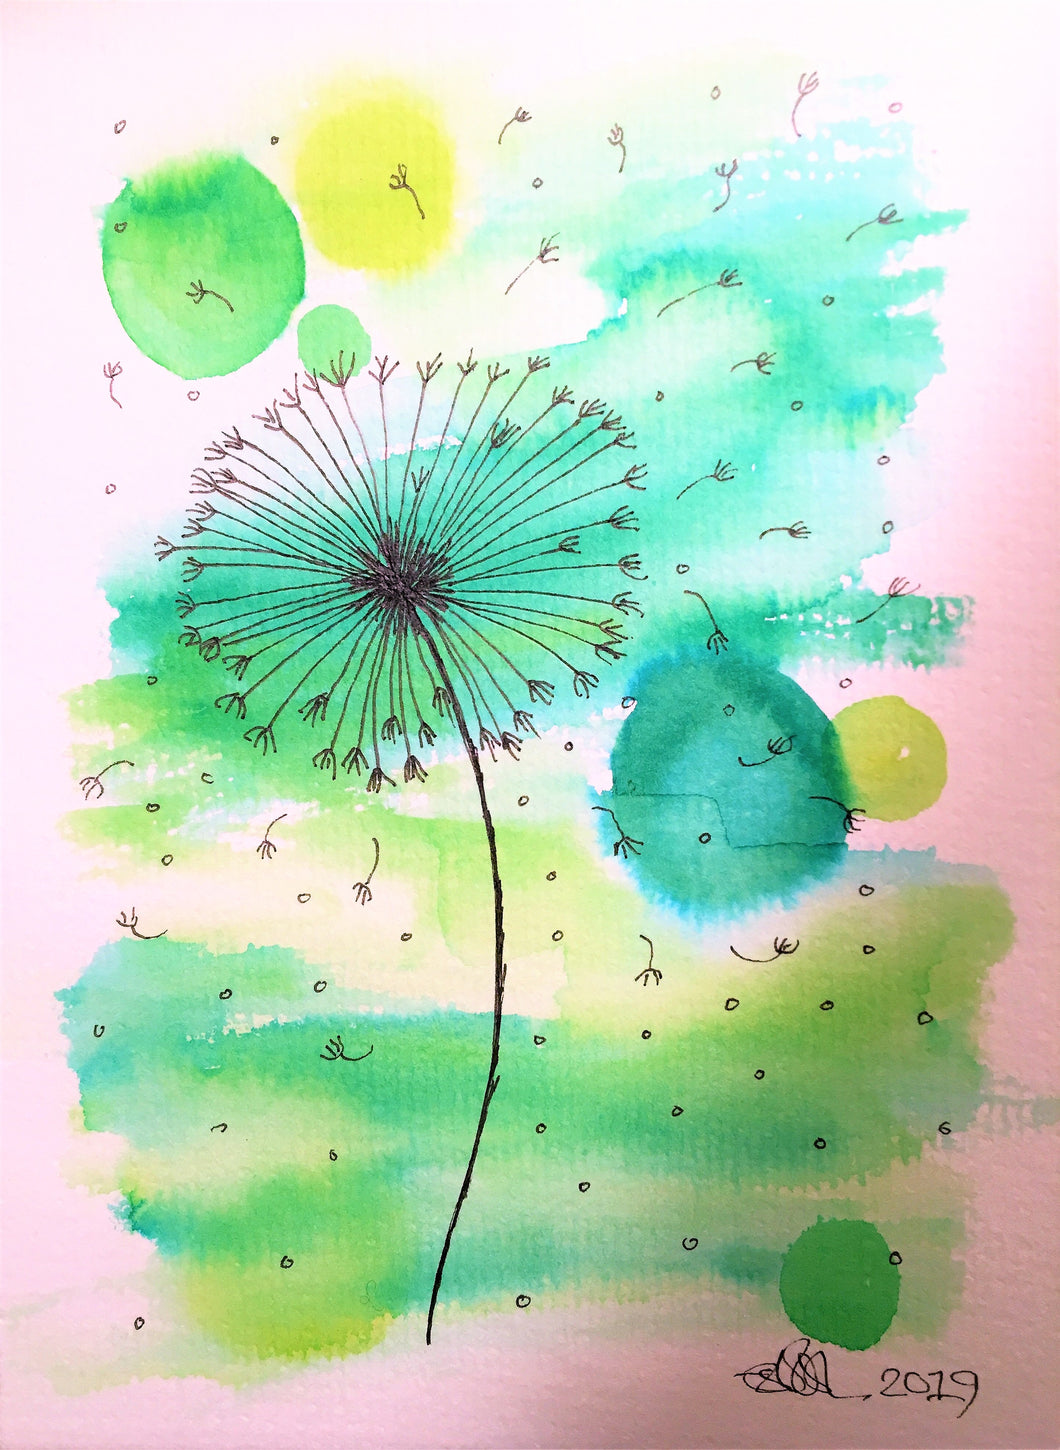 Handpainted Watercolour Greeting Card - Abstract Green with Dandelions - eDgE dEsiGn London